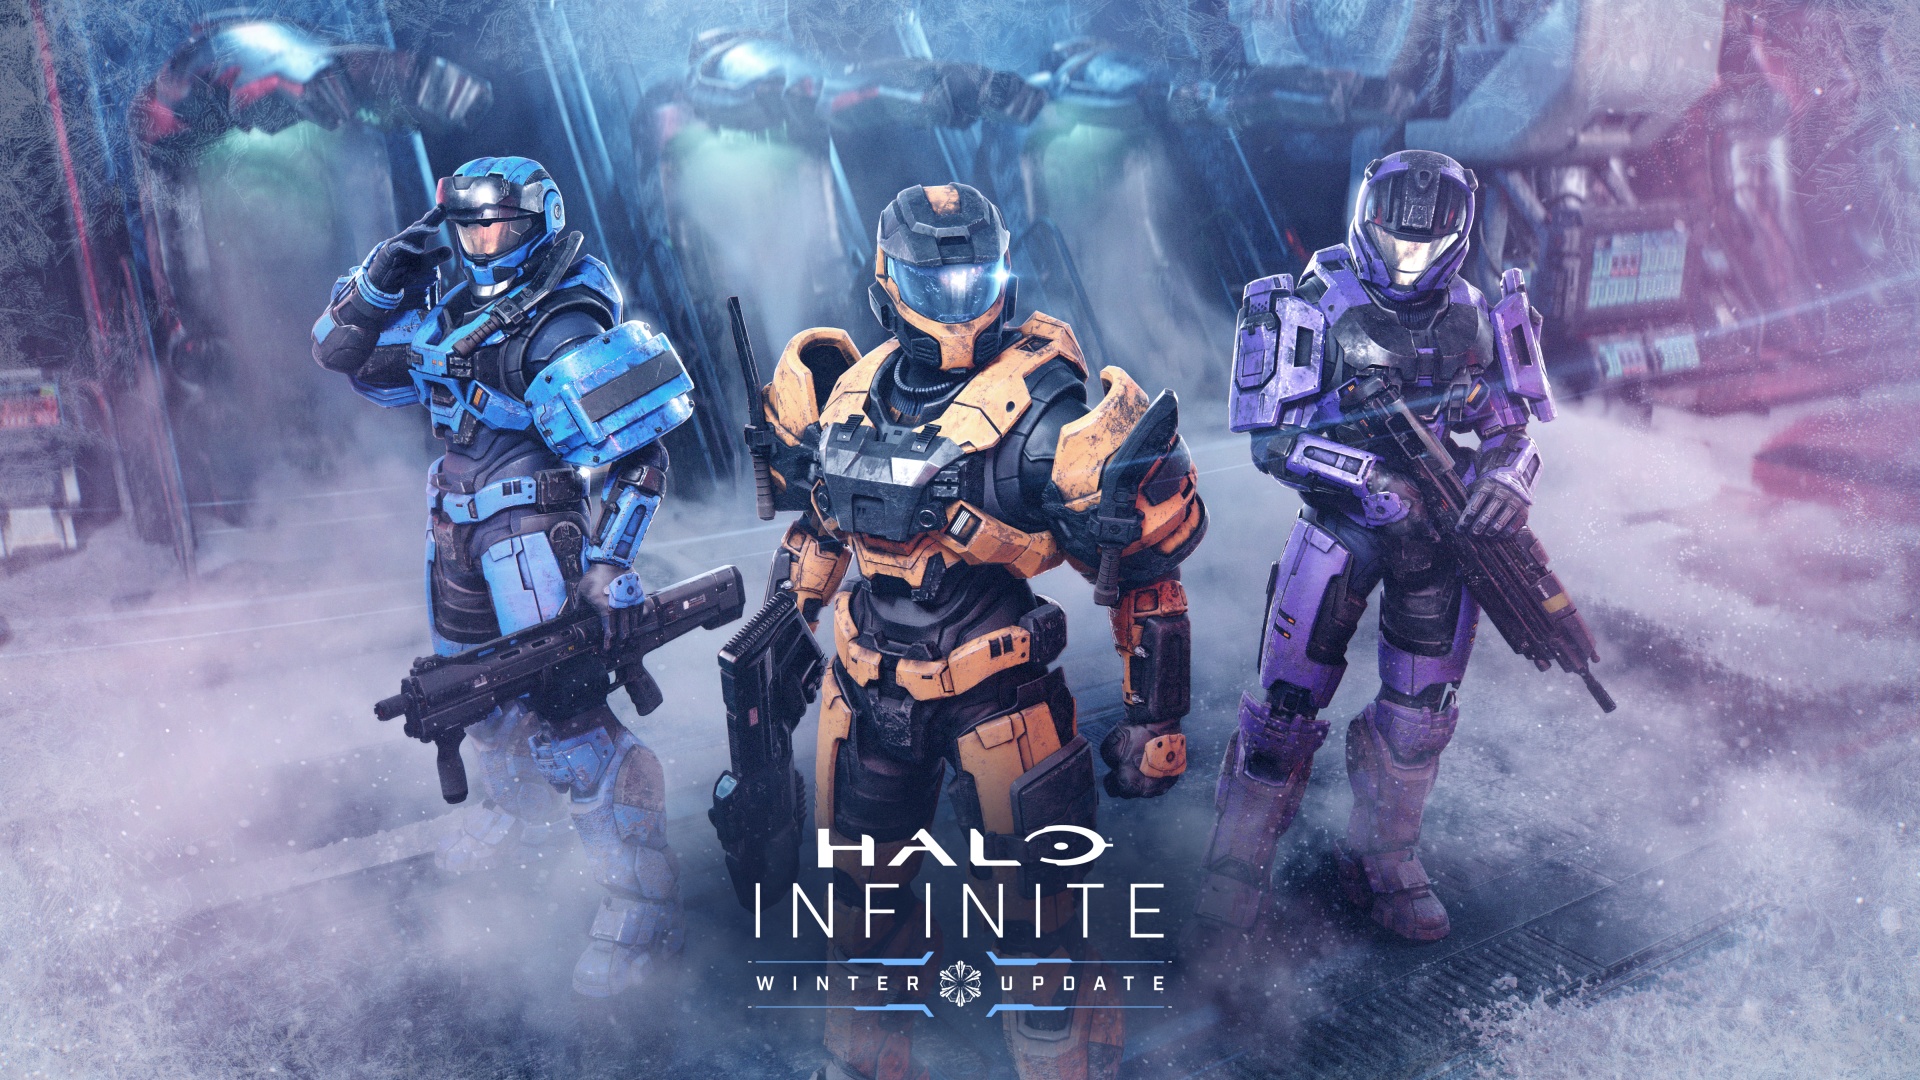 Available Now: Get Frosty in Halo Infinite's Winter Update